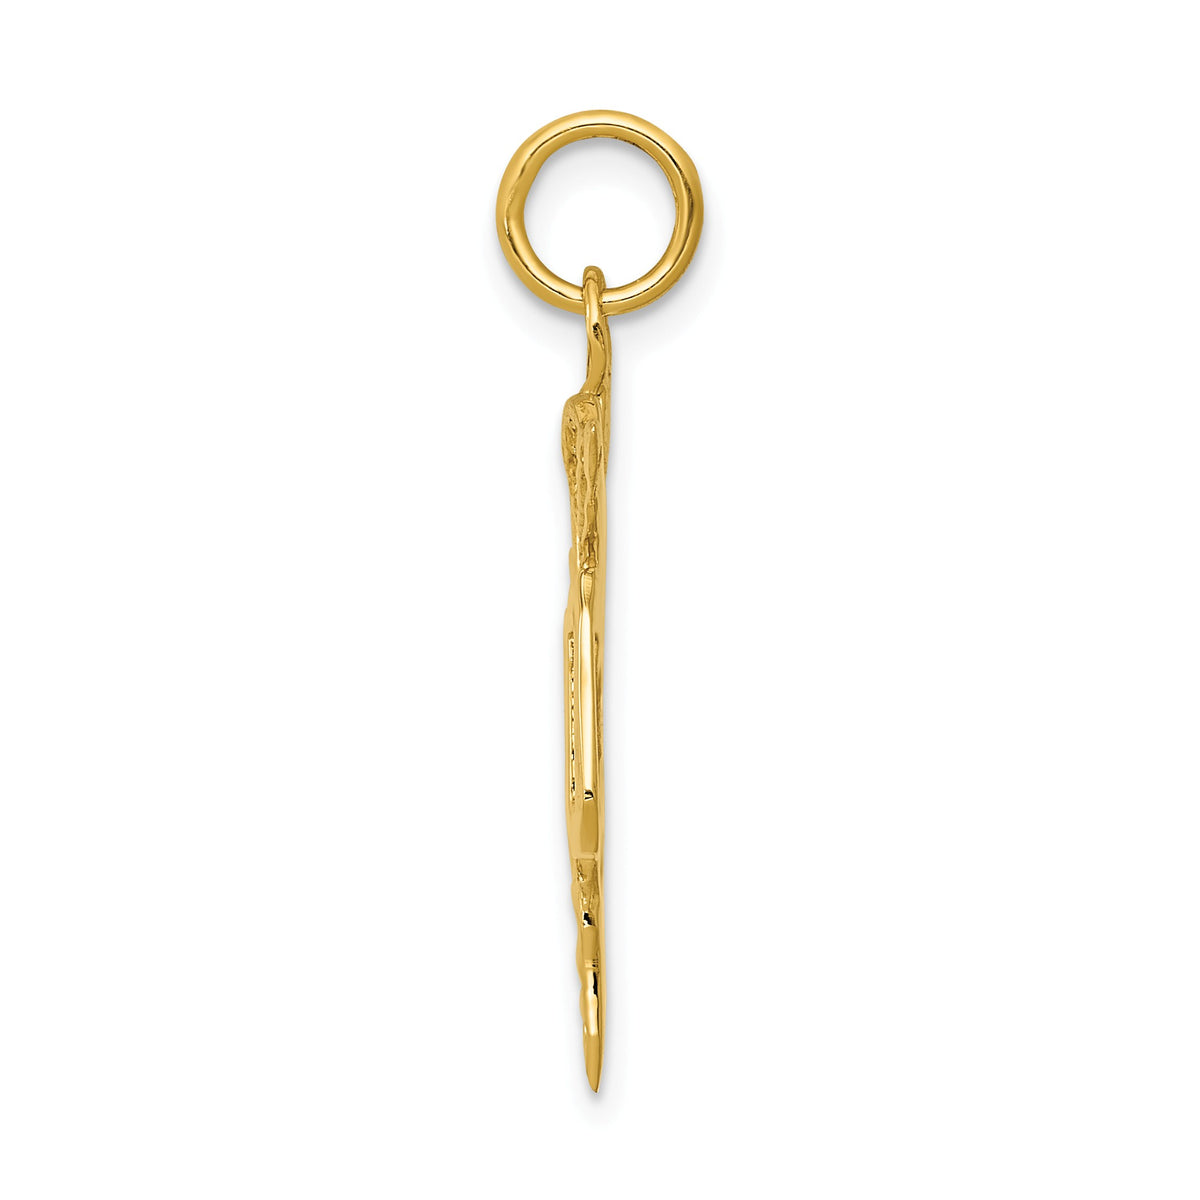 Alternate view of the 14k Yellow Gold MD Caduceus Charm 22mm by The Black Bow Jewelry Co.